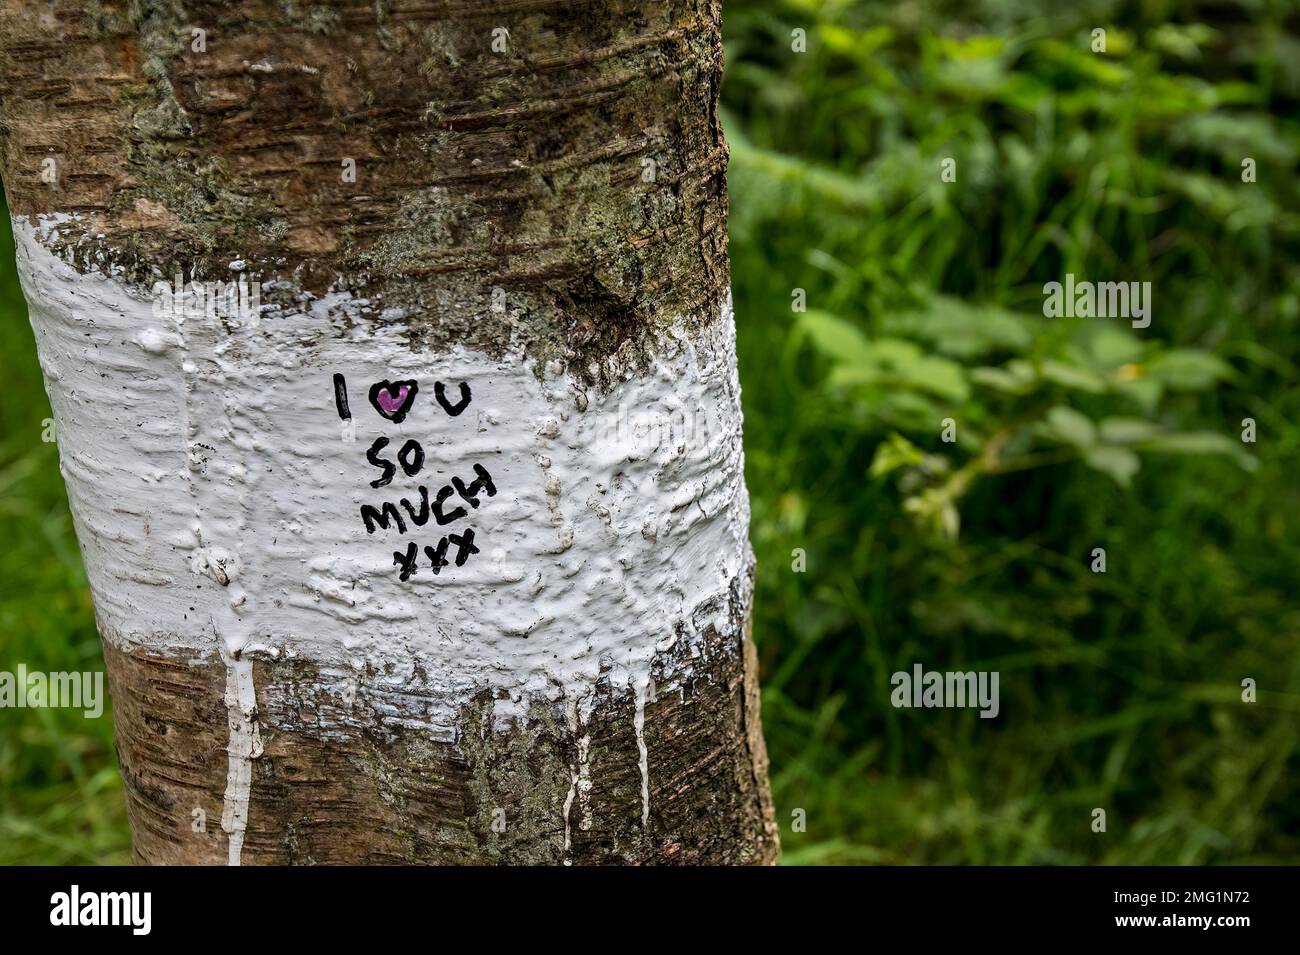 A message of love painted on a tree. Stock Photo